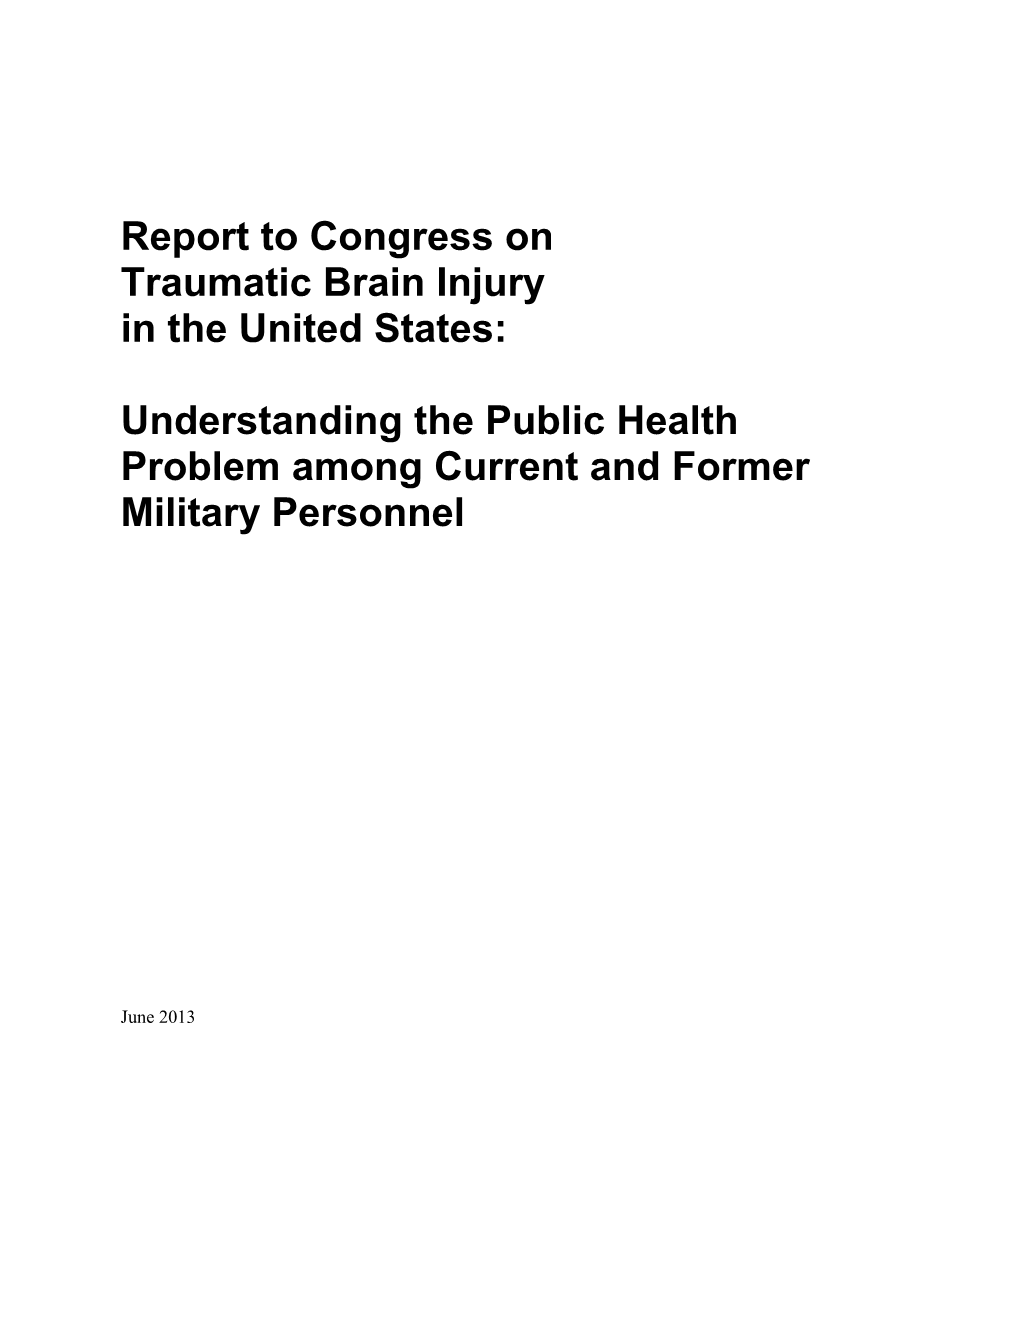 Report to Congress on Traumatic Brain Injury in the United States